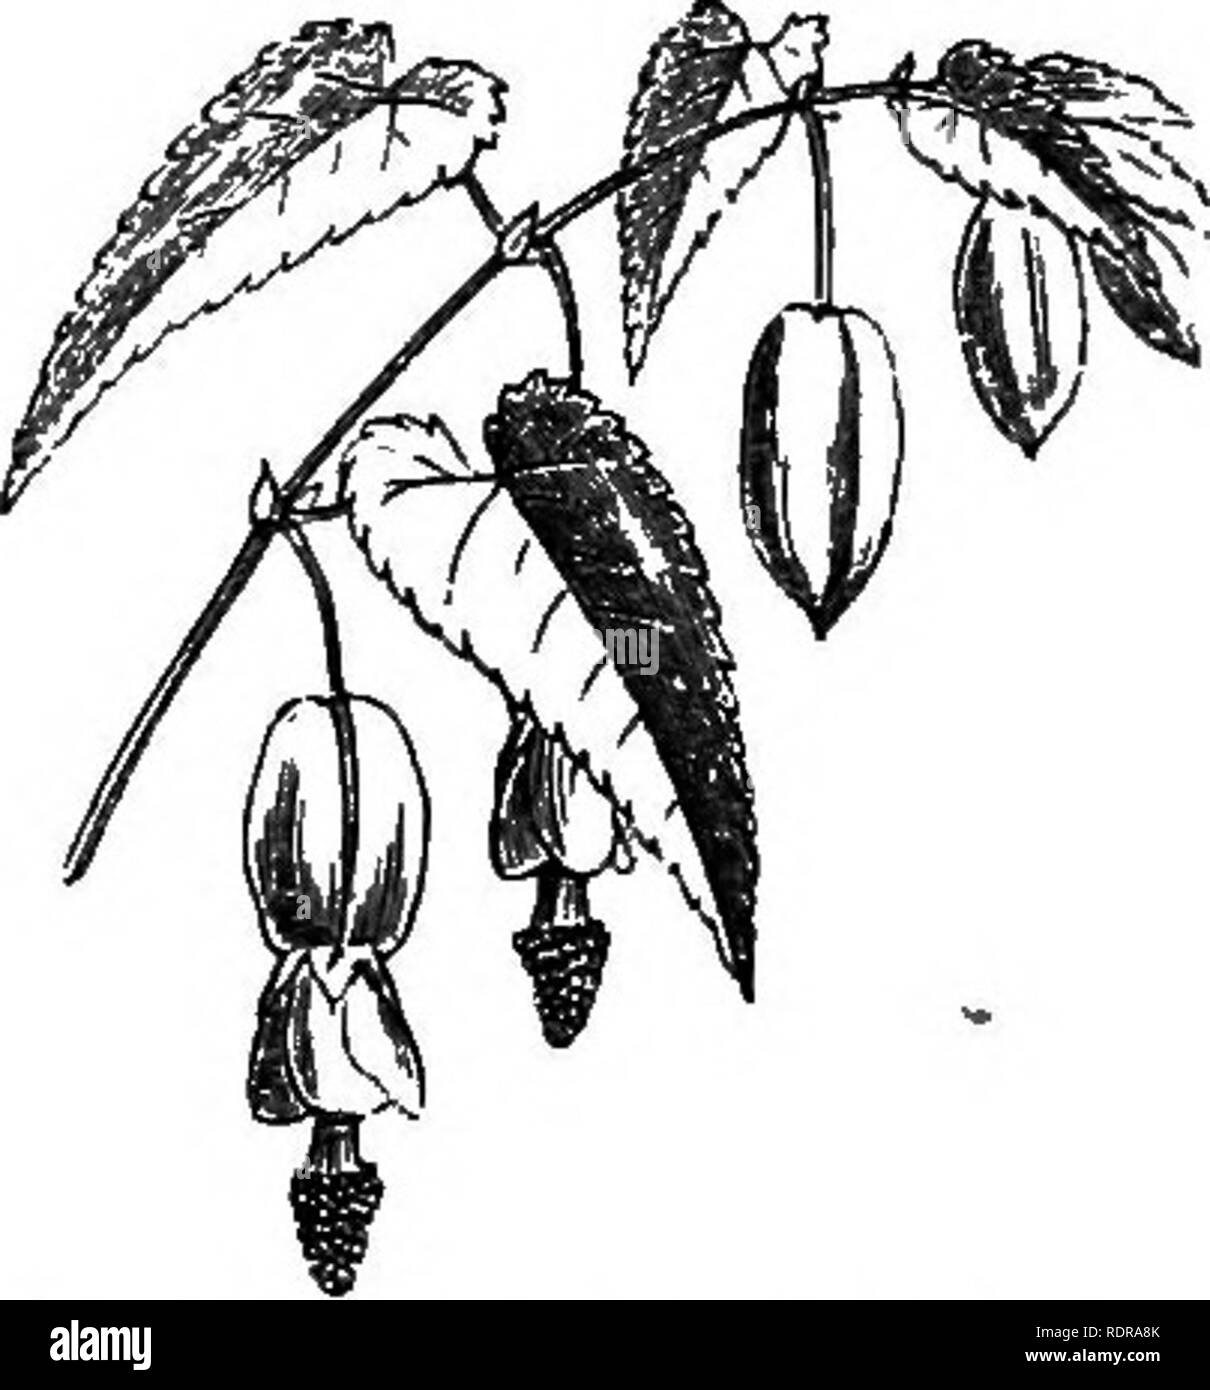 . My garden, its plan and culture together with a general description of its geology, botany, and natural history. Gardening. Fig. 603.—Stigmaphyllon ciliatum. Fig. 603 rt.—Hop, Fig. 604.—Abutilon vexillariuni. The Abutilon vexillariiim or A. Megapotamicum (fig. 604) is another showy climber, which produces abundance of flowers in the cool part of the fernery. The only care it requires is to keep the plant within reasonable dimensions. It is easily propagated by cuttings. We have grown at times many Thunbergias. The common-ones— the Thunbergia alata (fig. 600 a) and auran- tiaca, with their be Stock Photo